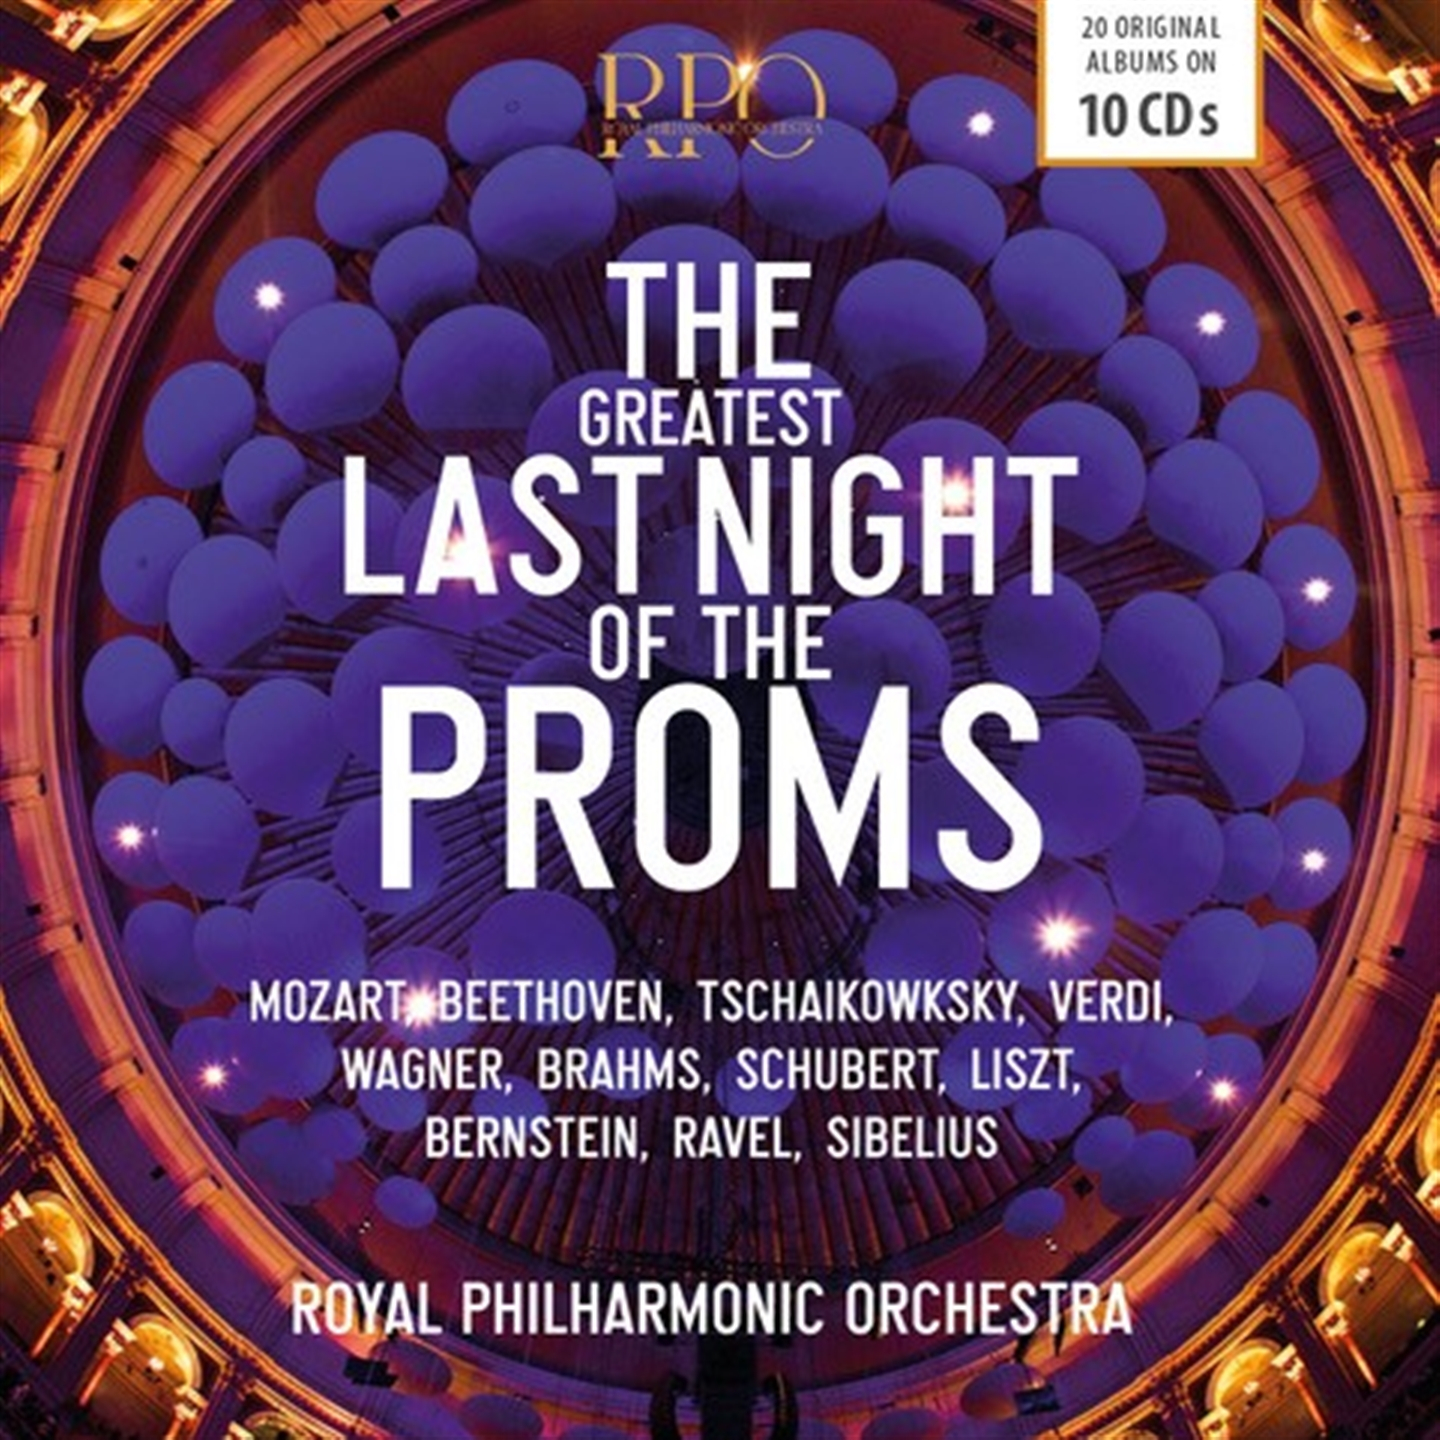 Royal Philharmonic Orchestra - The Greatest Last Night Of The Proms - Picture 1 of 1